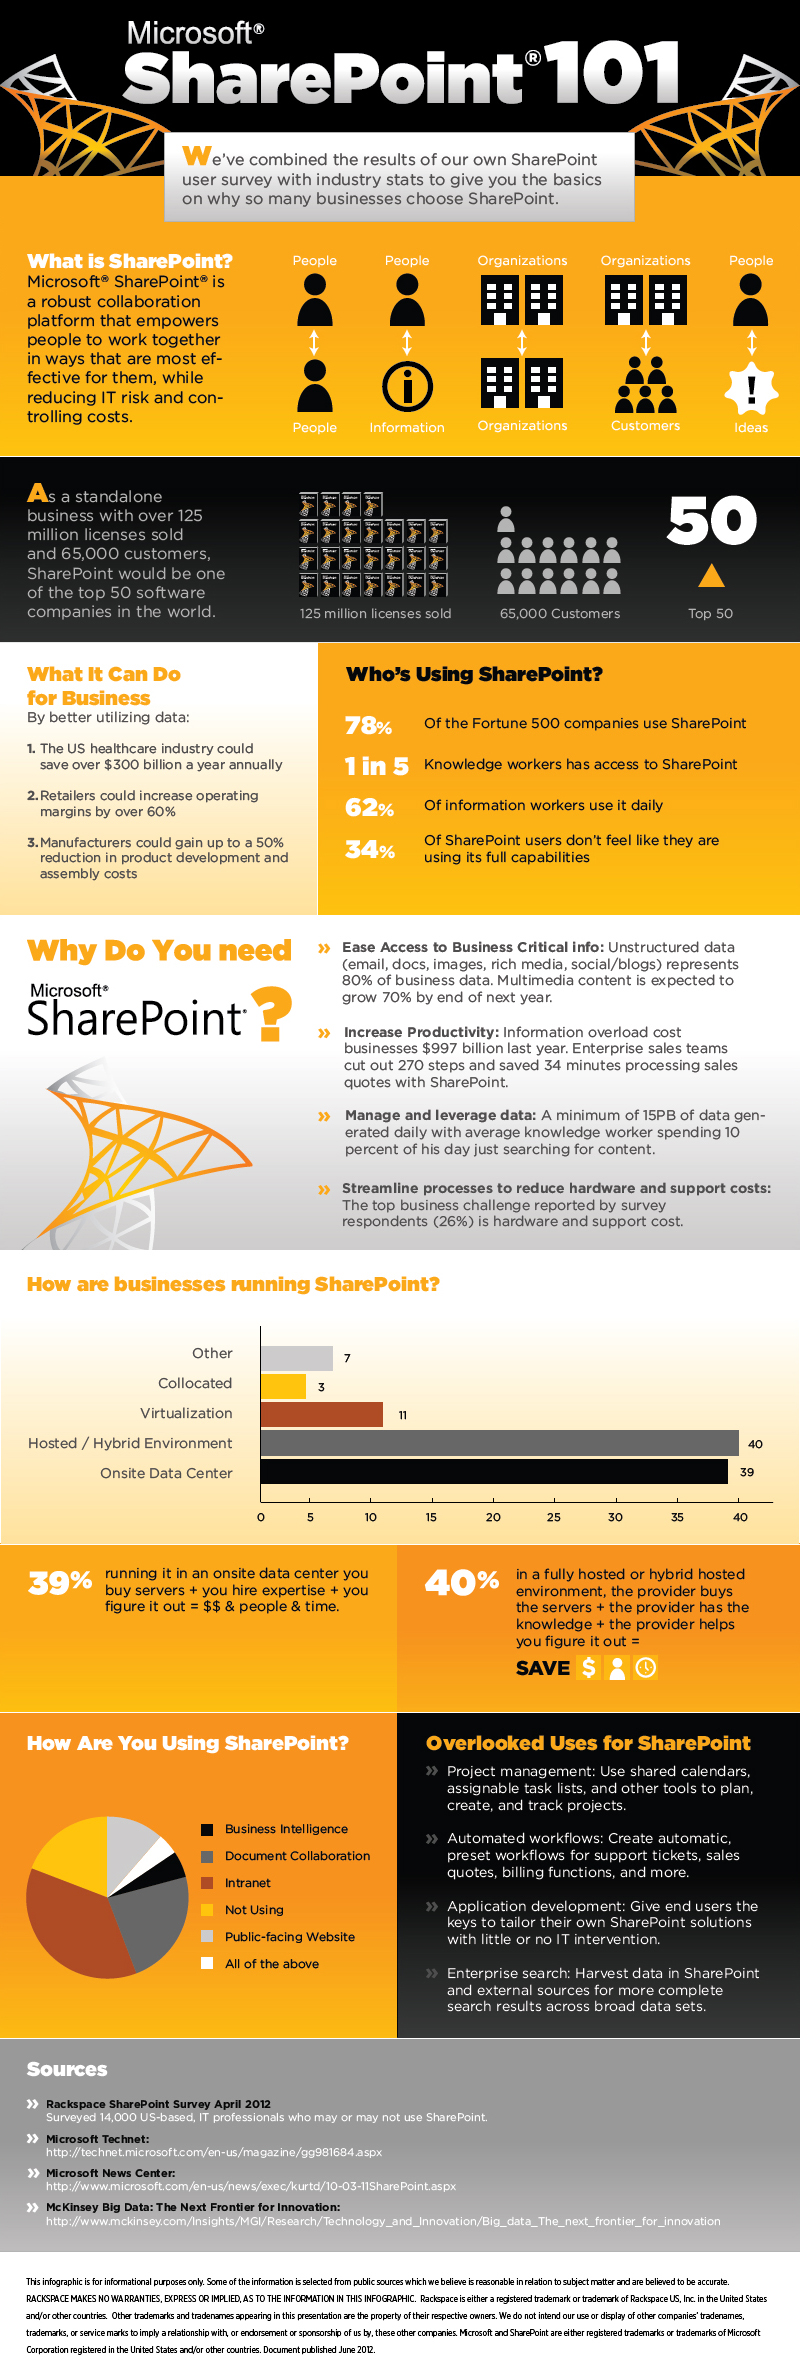 Rackspace® — Some Important Points About SharePoint [Infographic]